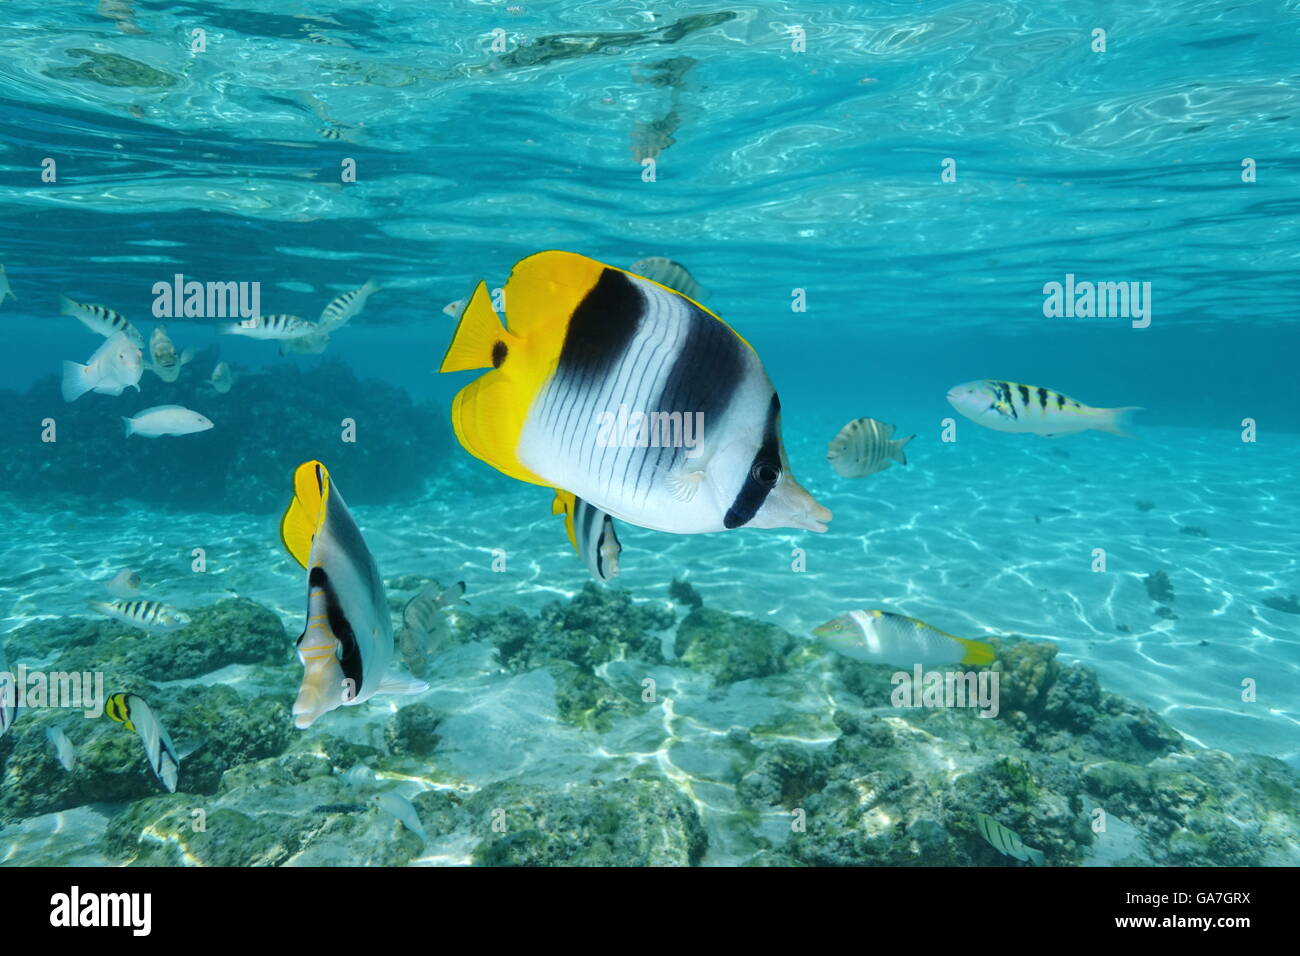 Tropical fish, Pacific double-saddle butterflyfish, Chaetodon ulietensis, underwater, Pacific ocean, French Polynesia Stock Photo